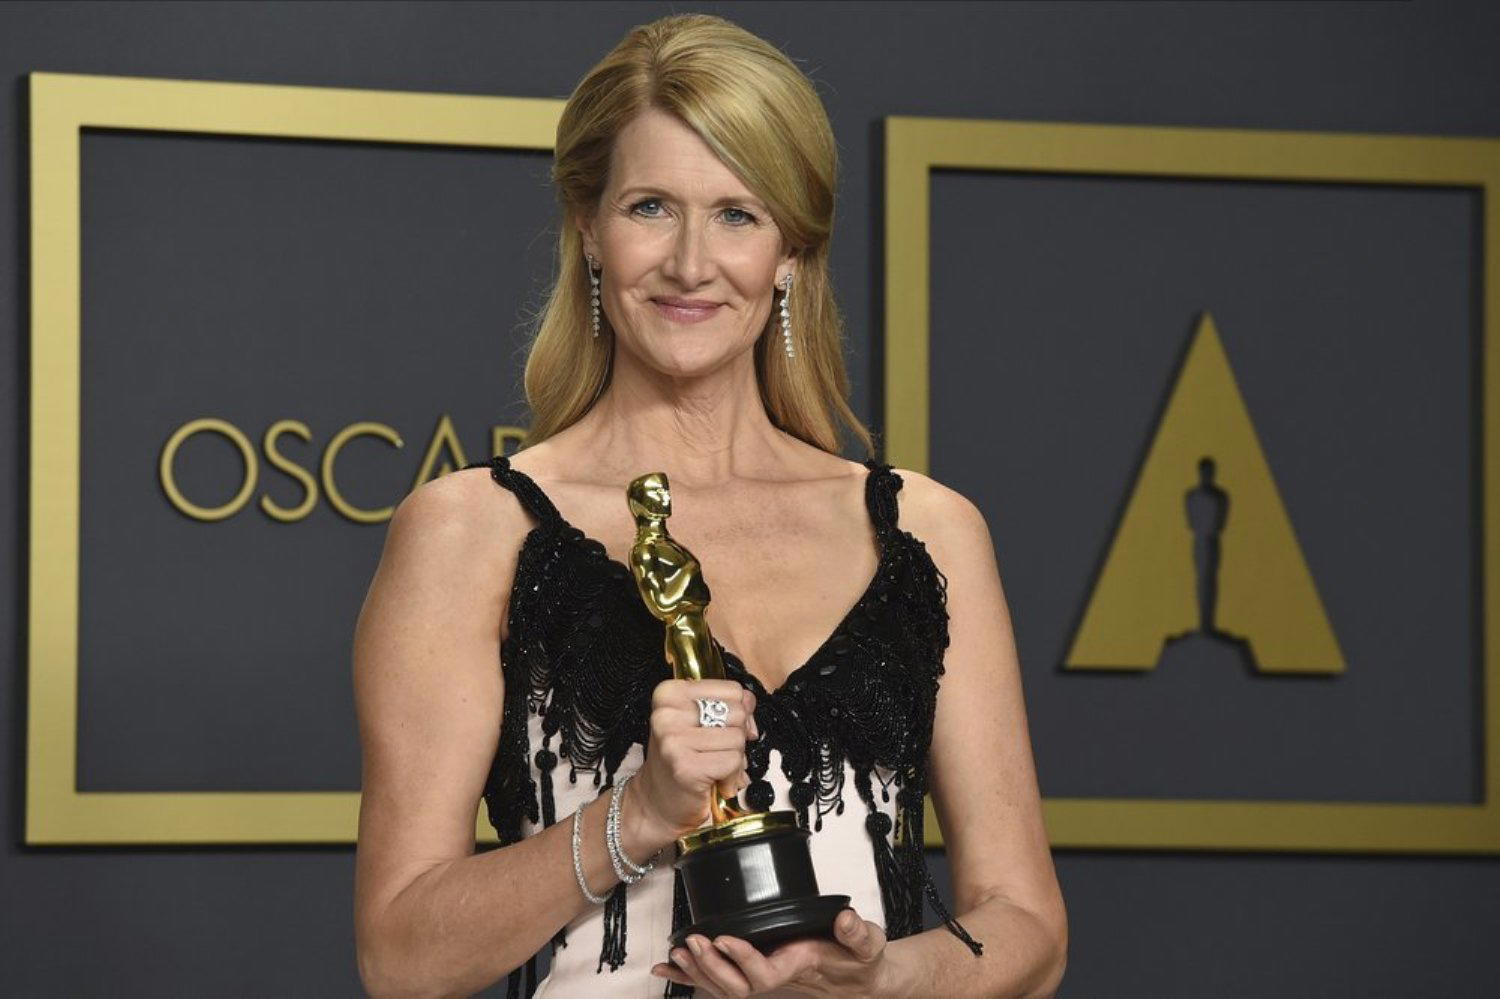 This Is Just To Say Good for You, Laura Dern